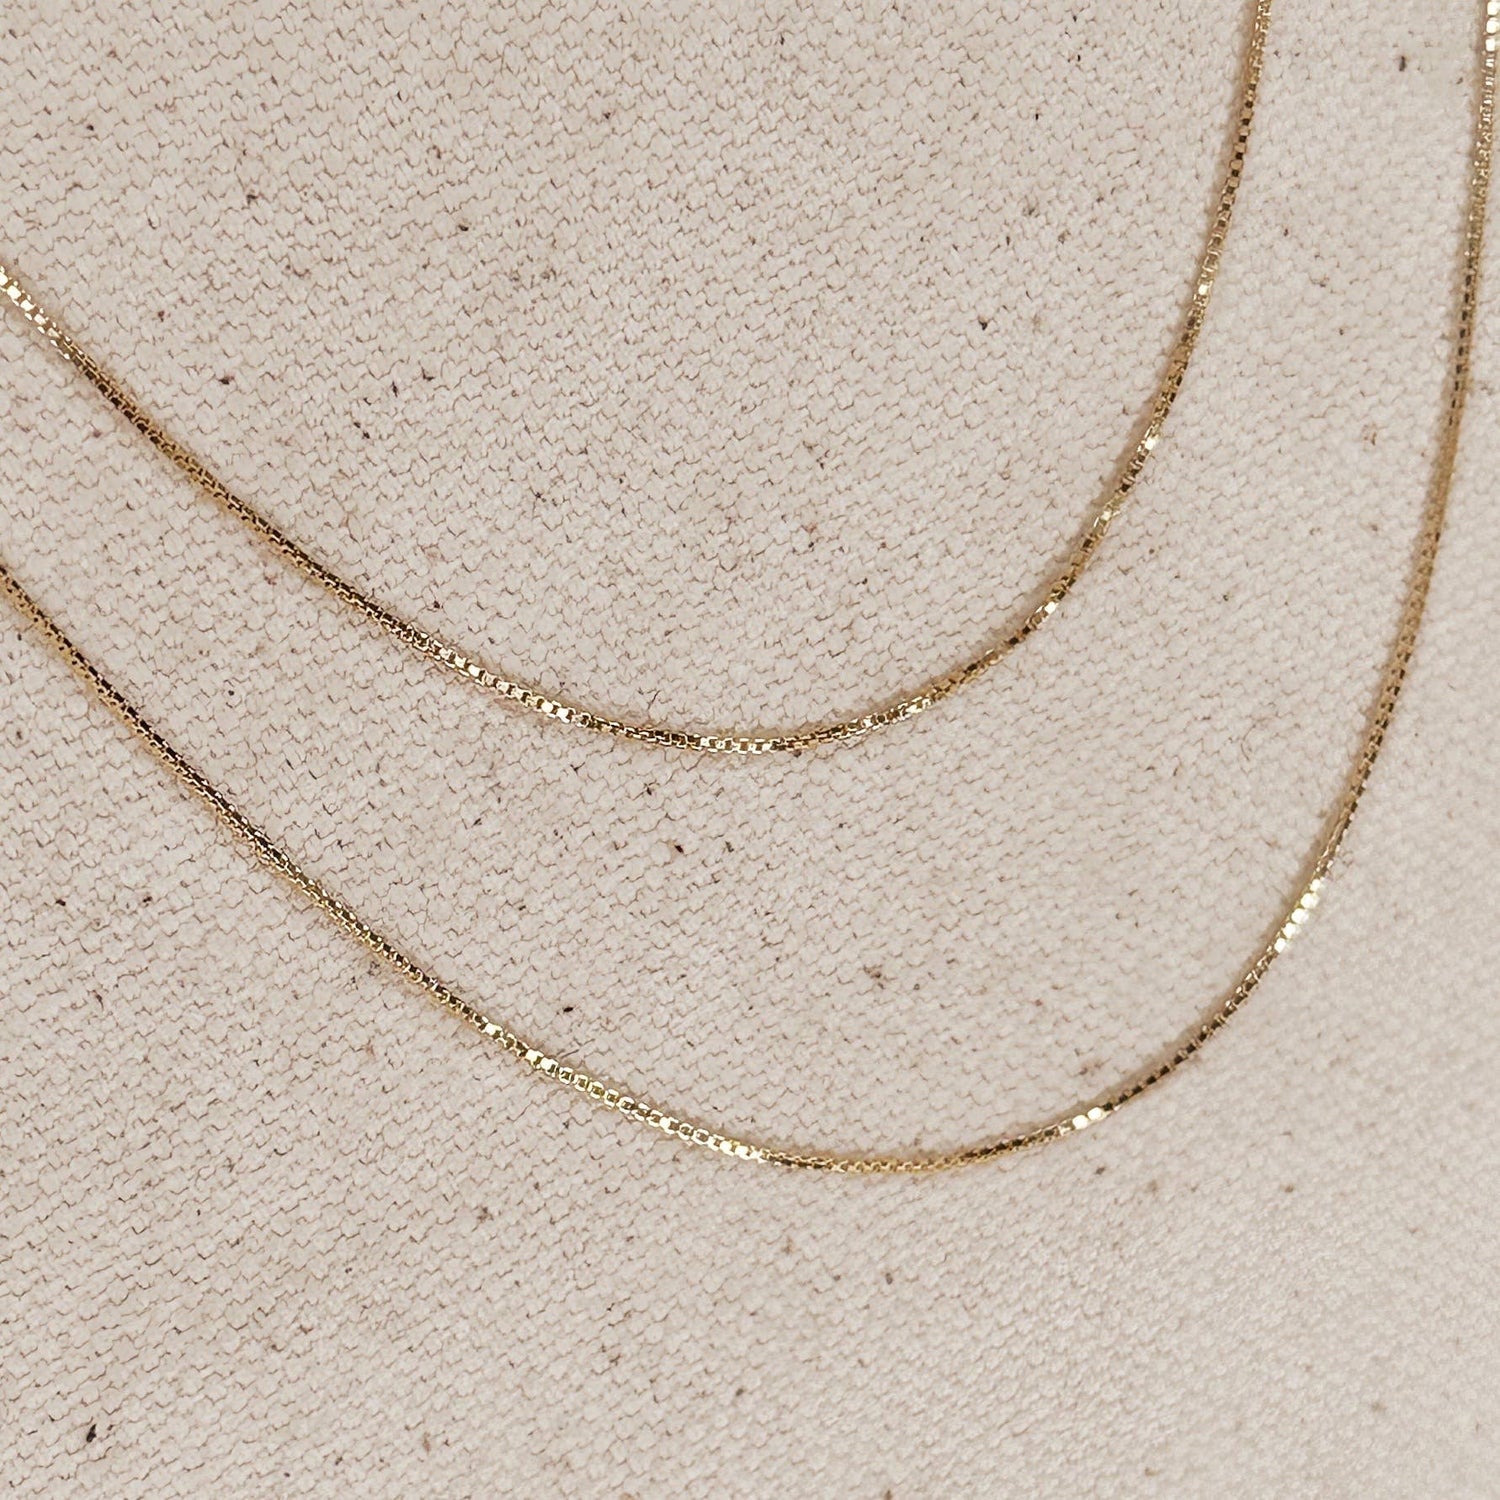 18k Gold Filled Box Chain - 20 inches